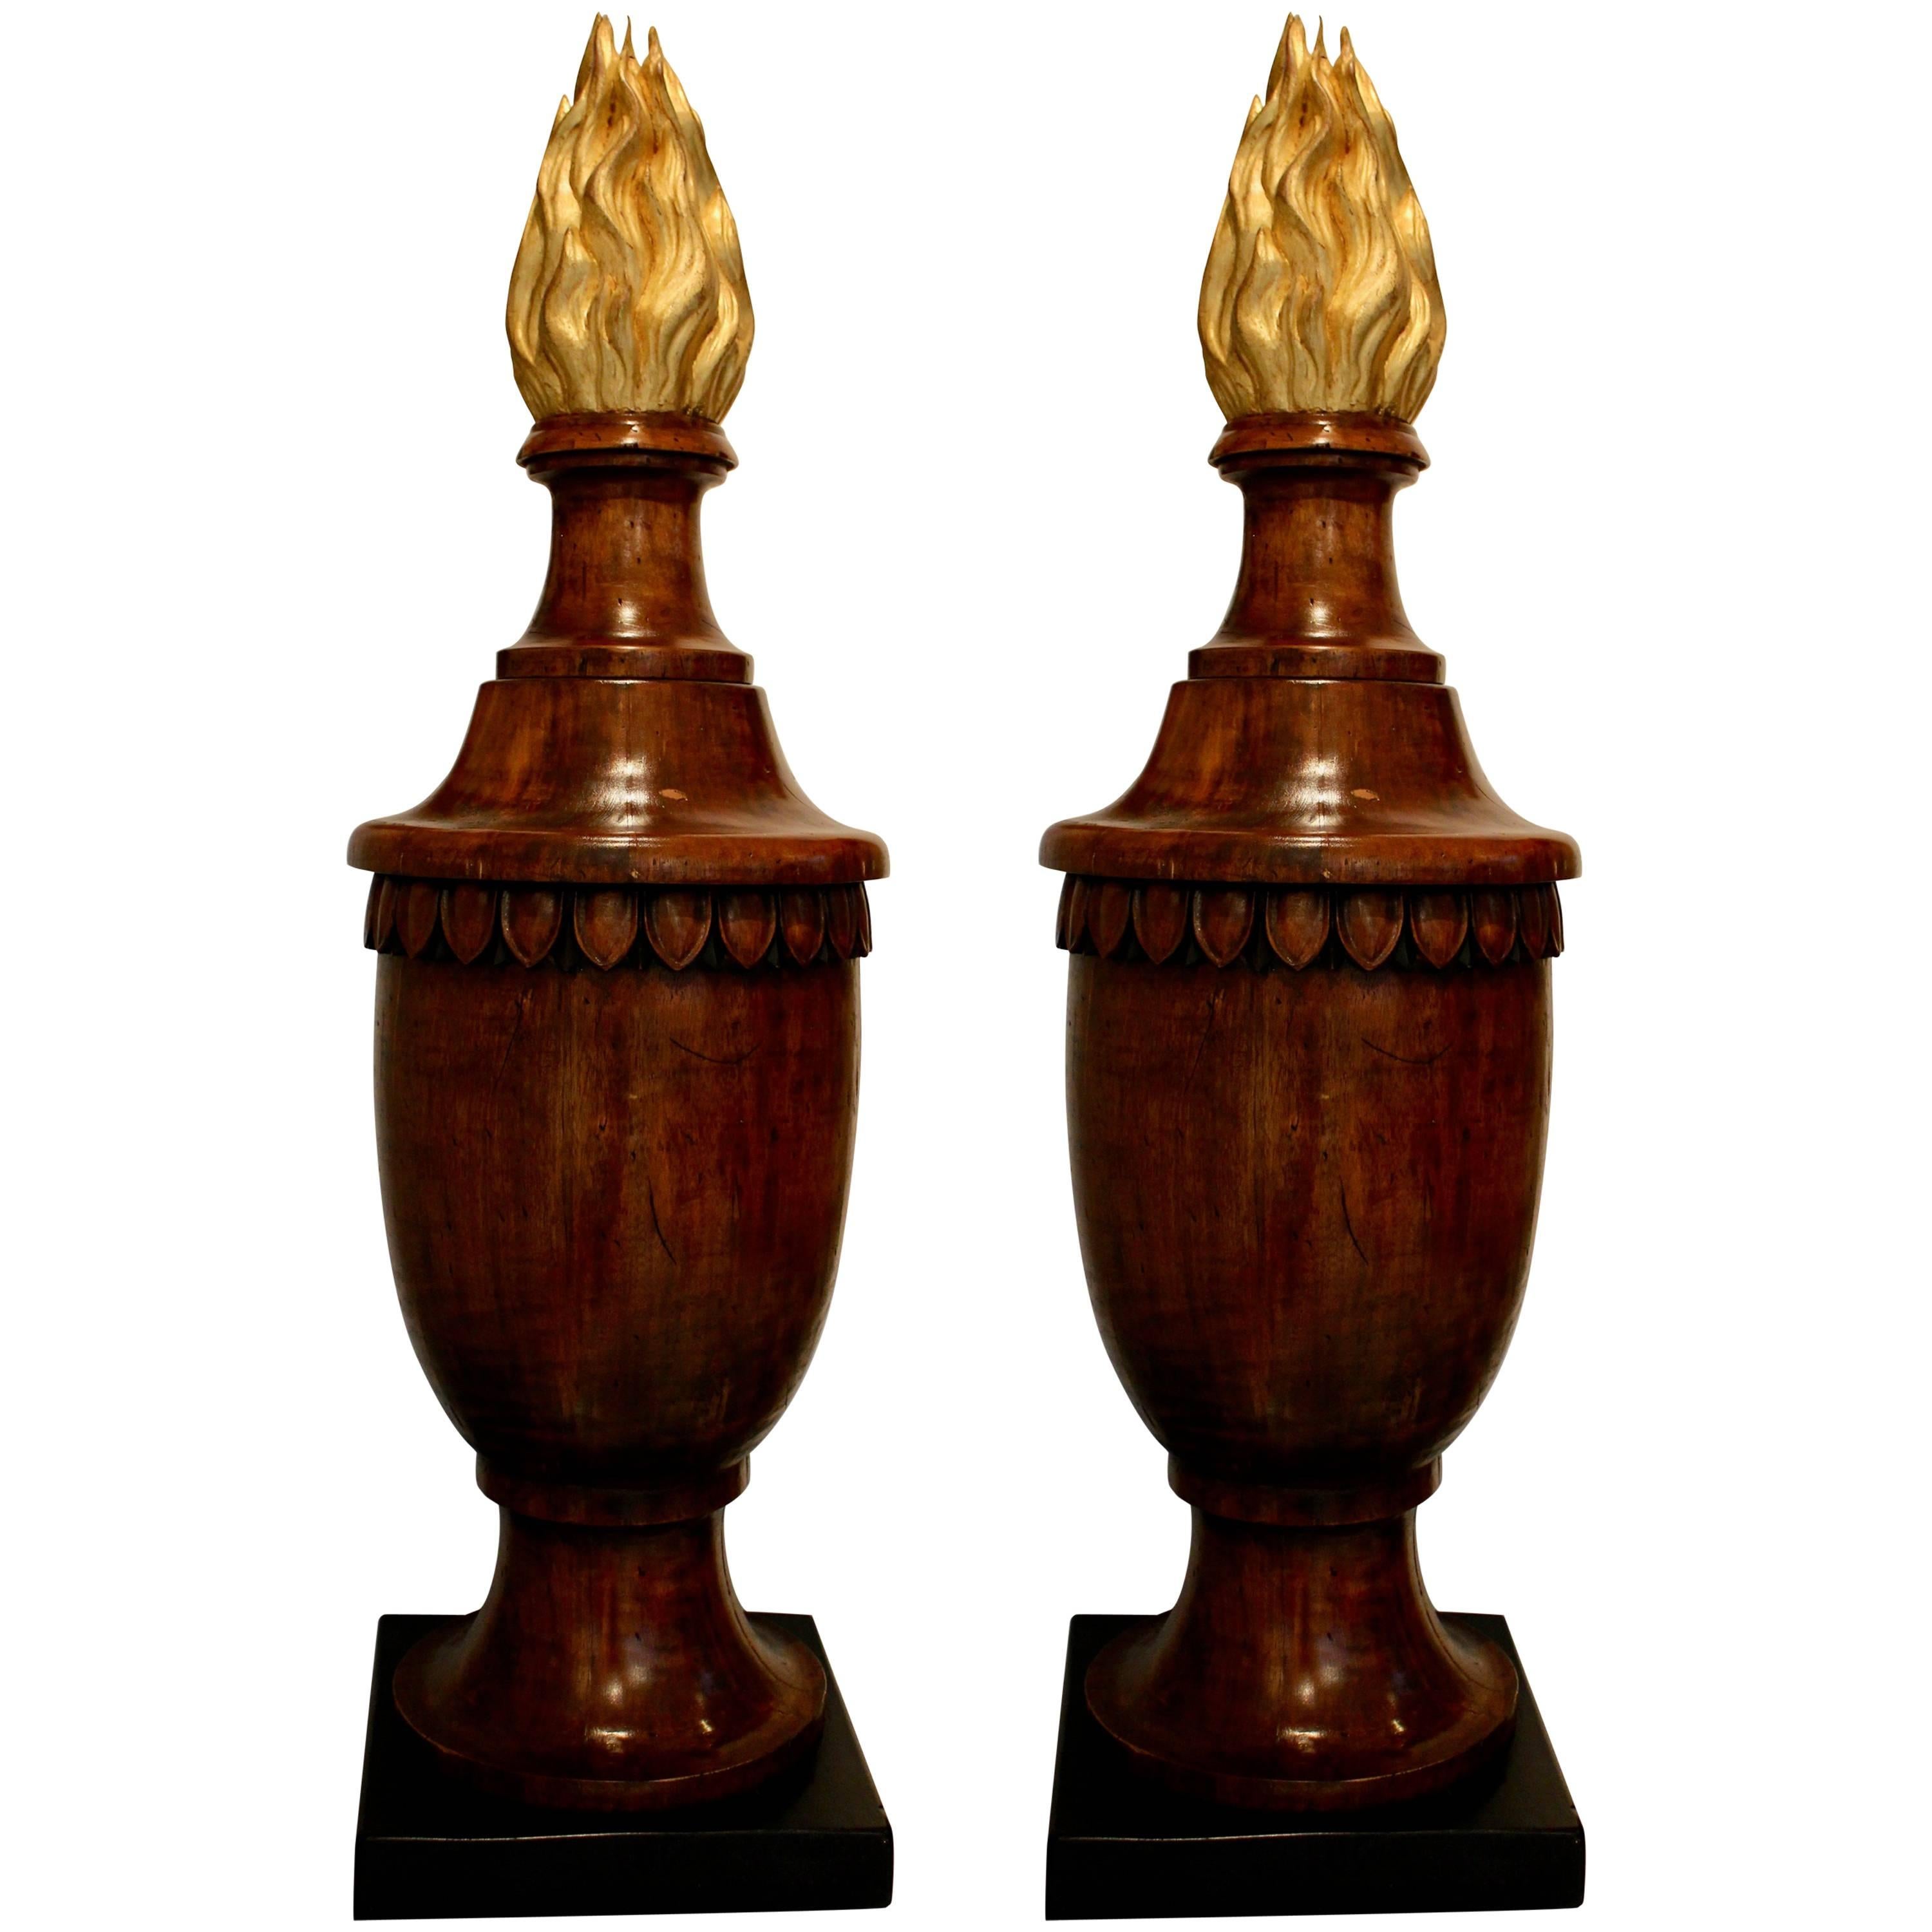 Pair of Neoclassical Style Wood Finials in the Form of Urns